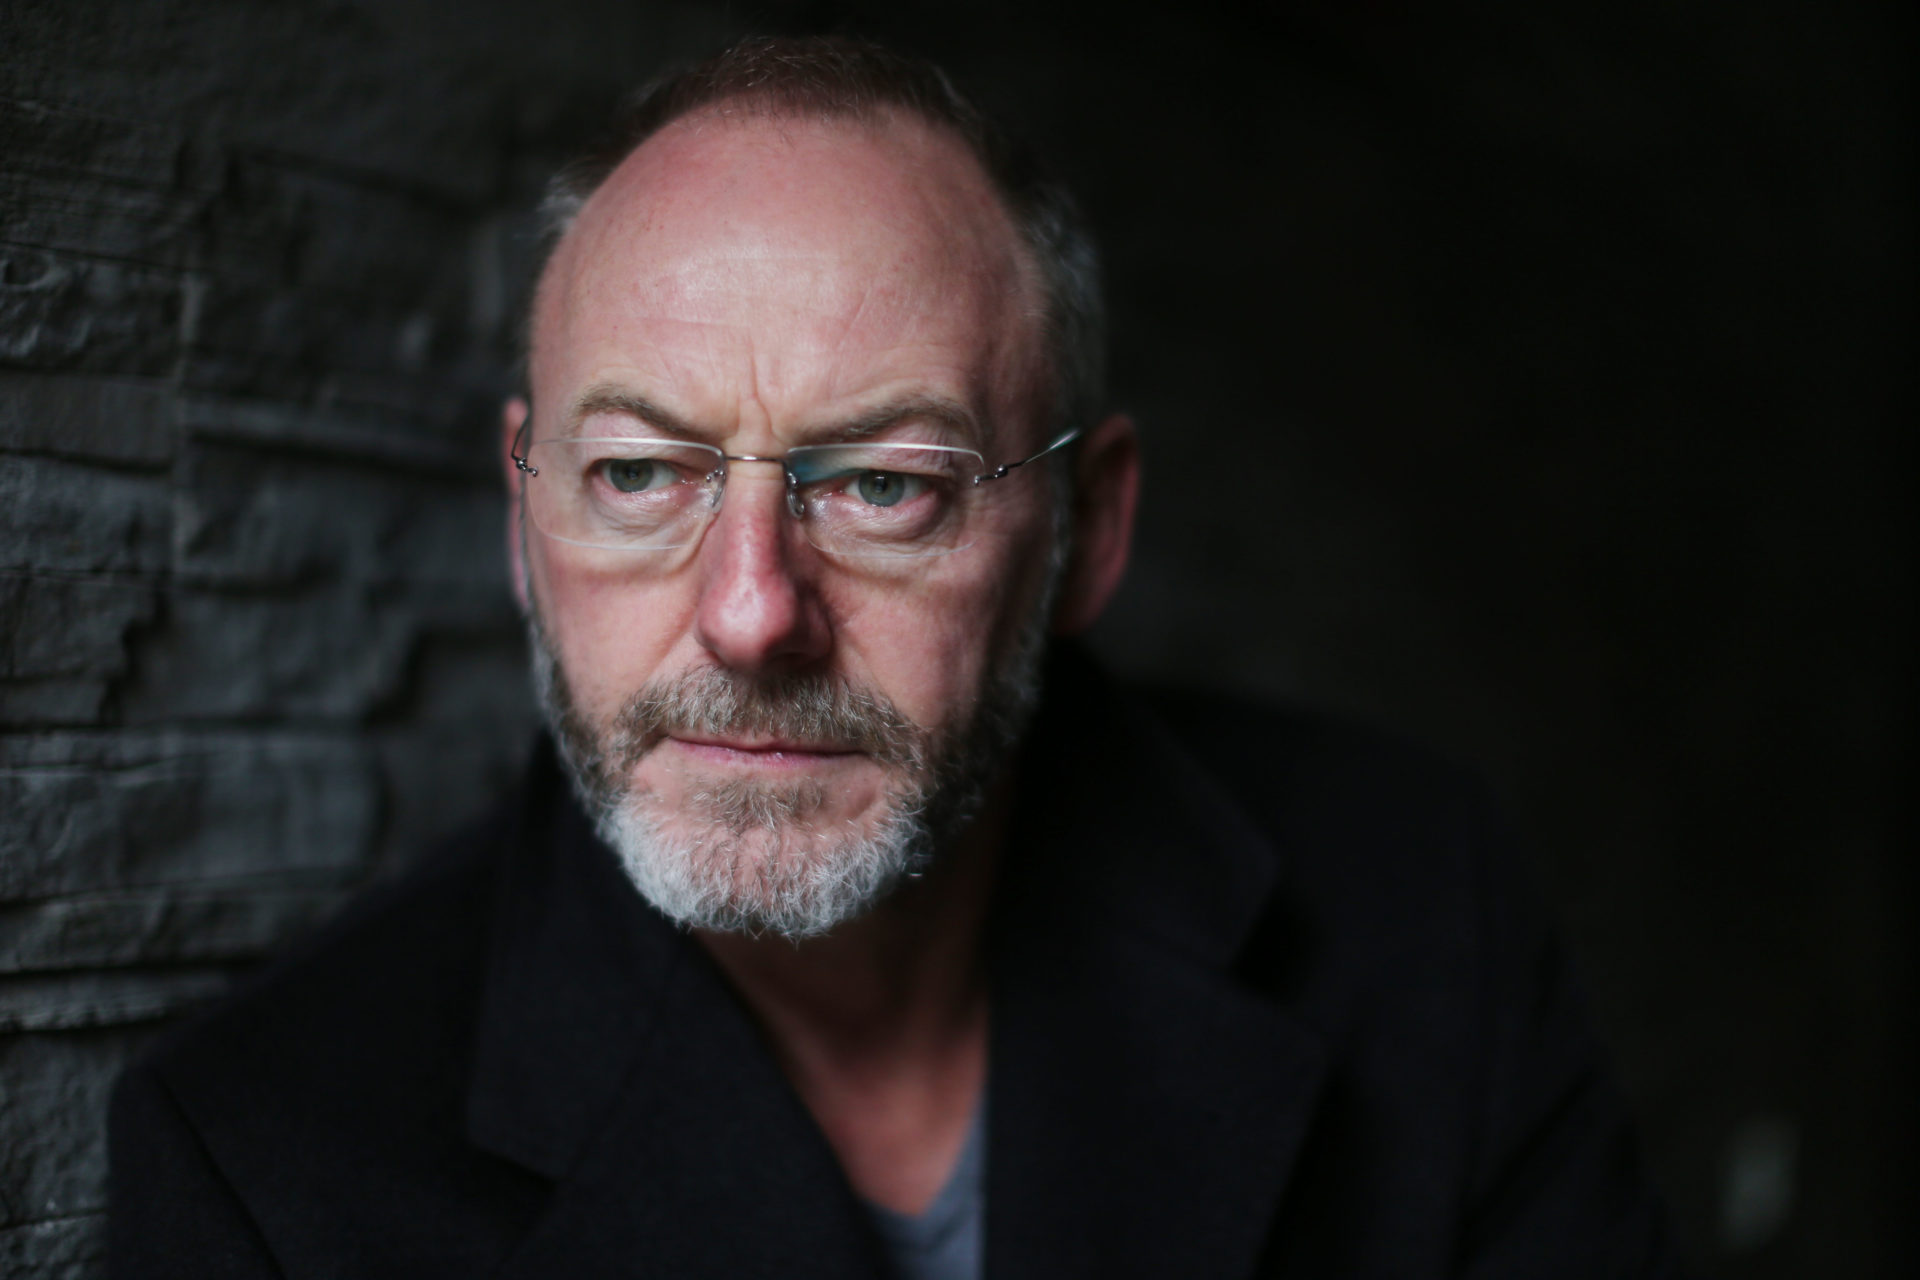 'The social contract is broken' - Liam Cunningham on 'thuggish' Dublin riots